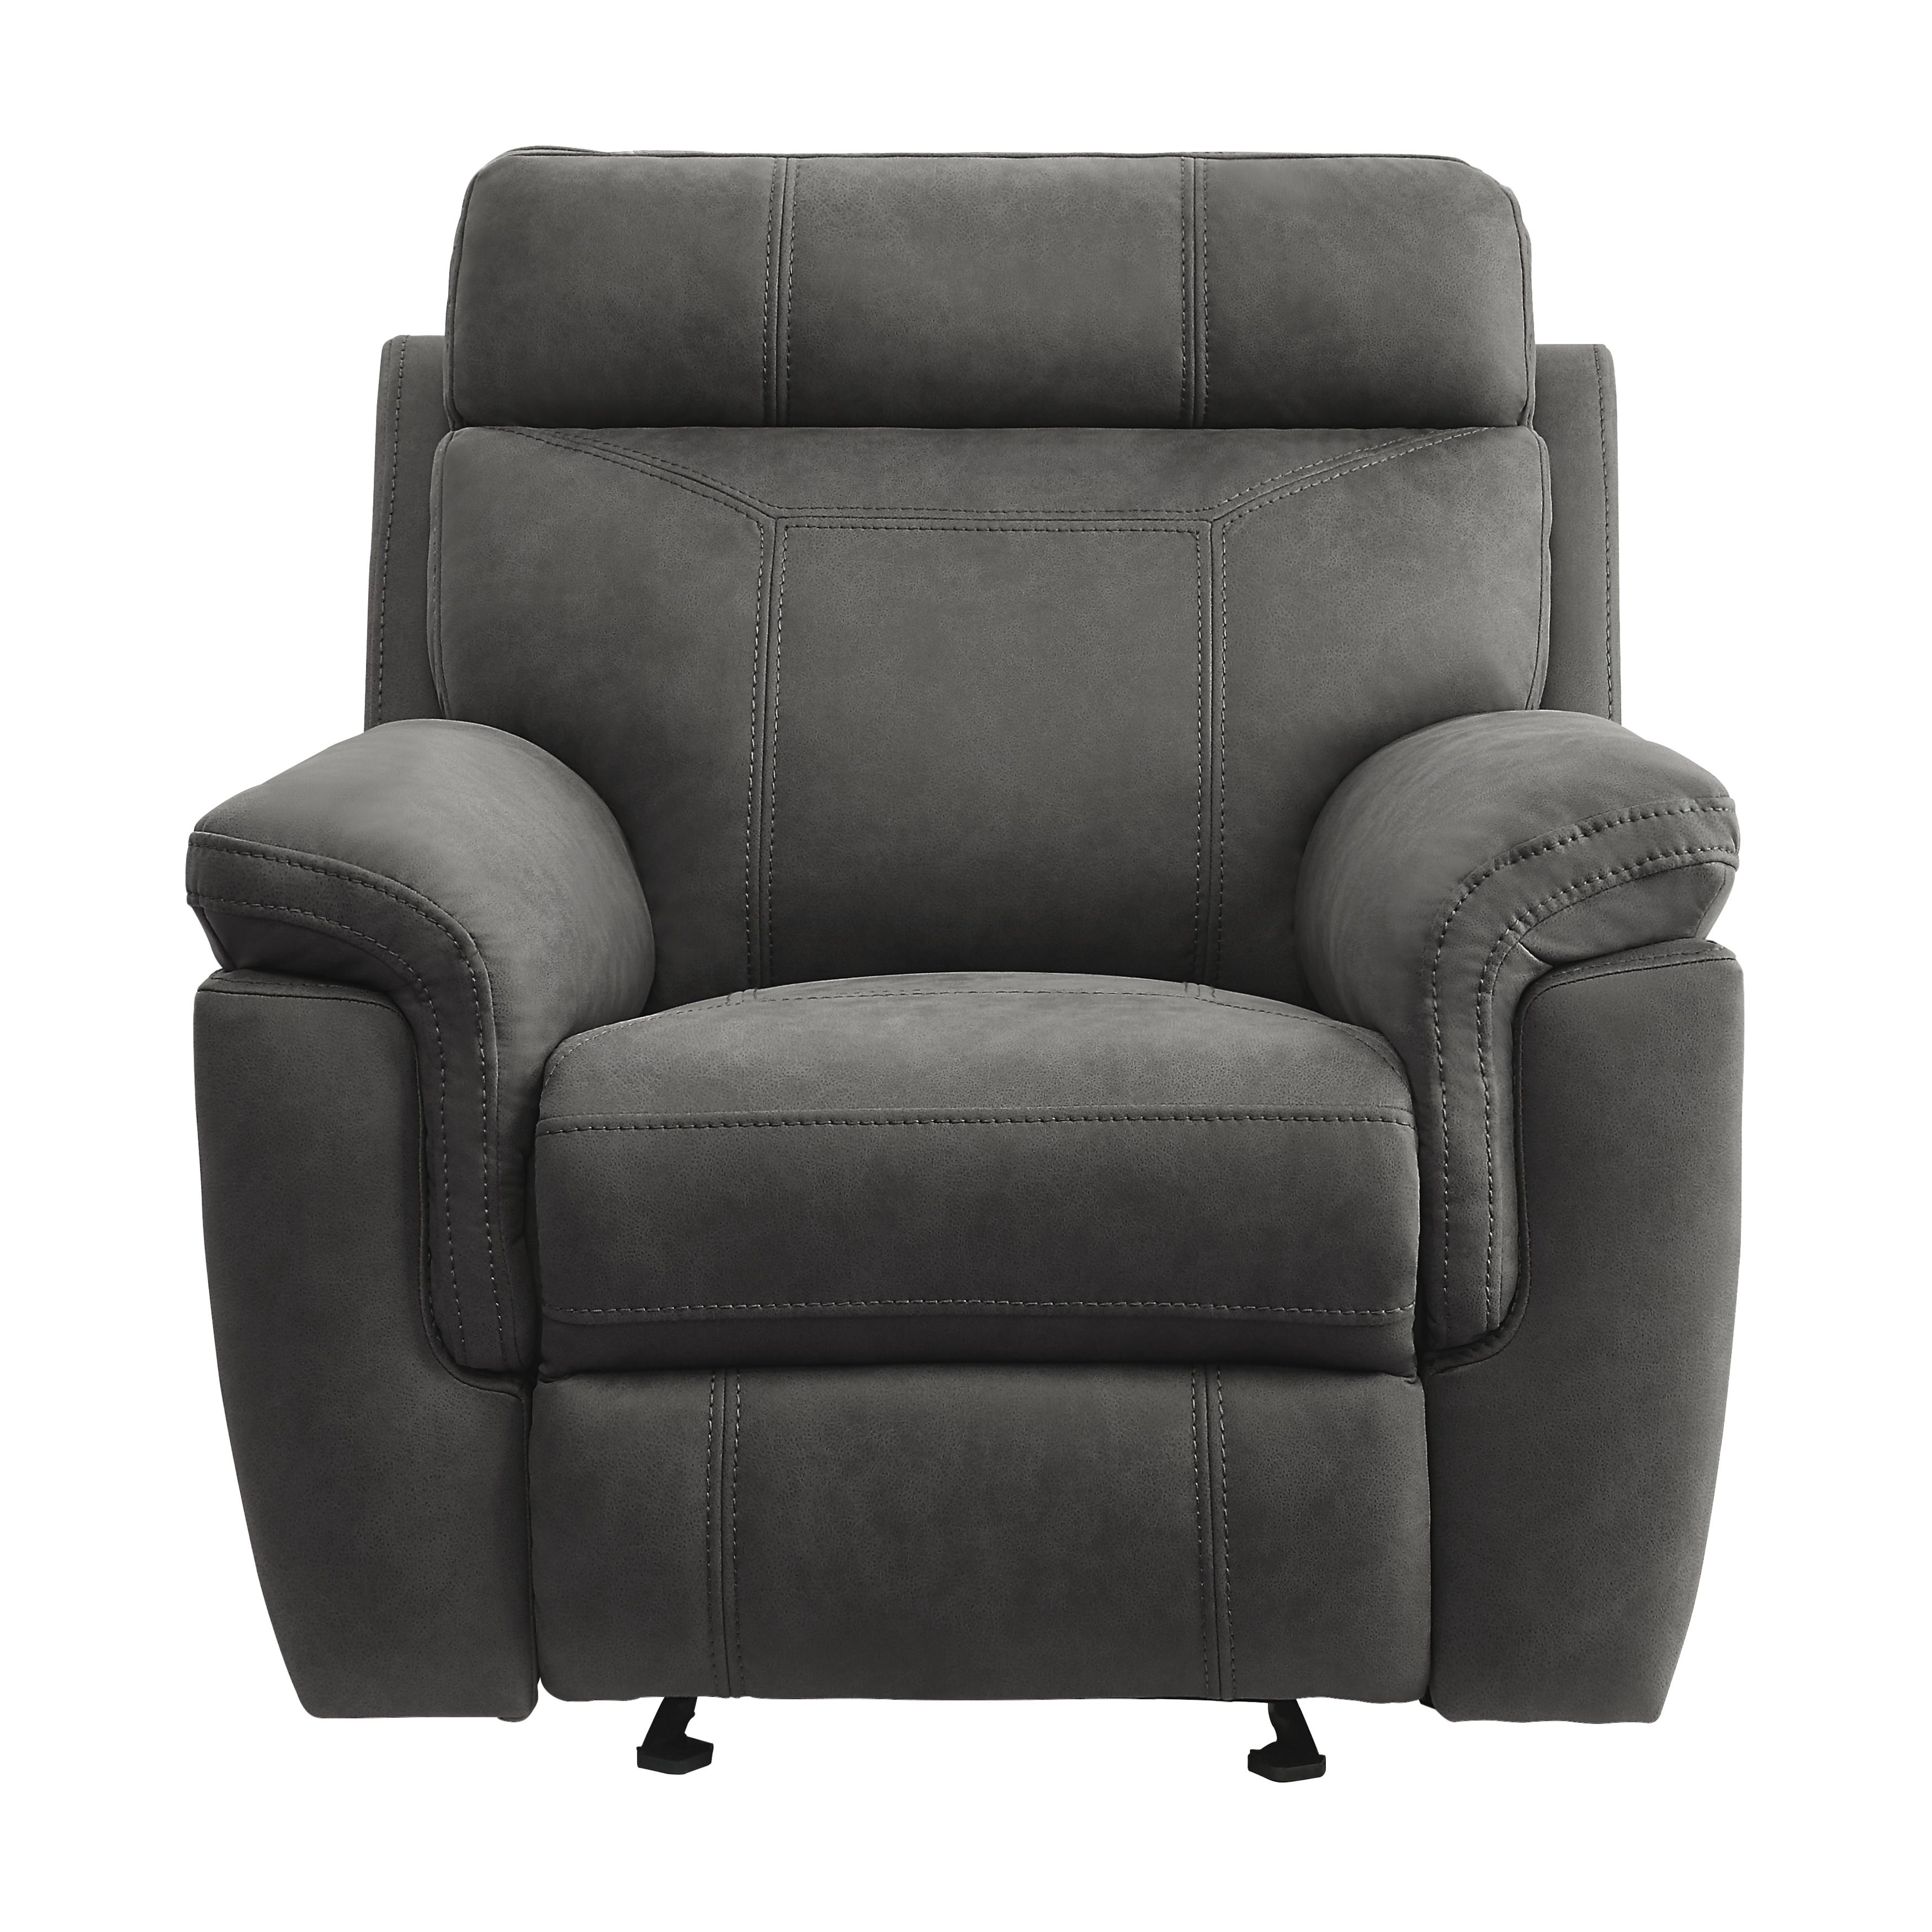 Modern Reclining Chair 9301GRY-1 Clifton 9301GRY-1 in Gray Microfiber